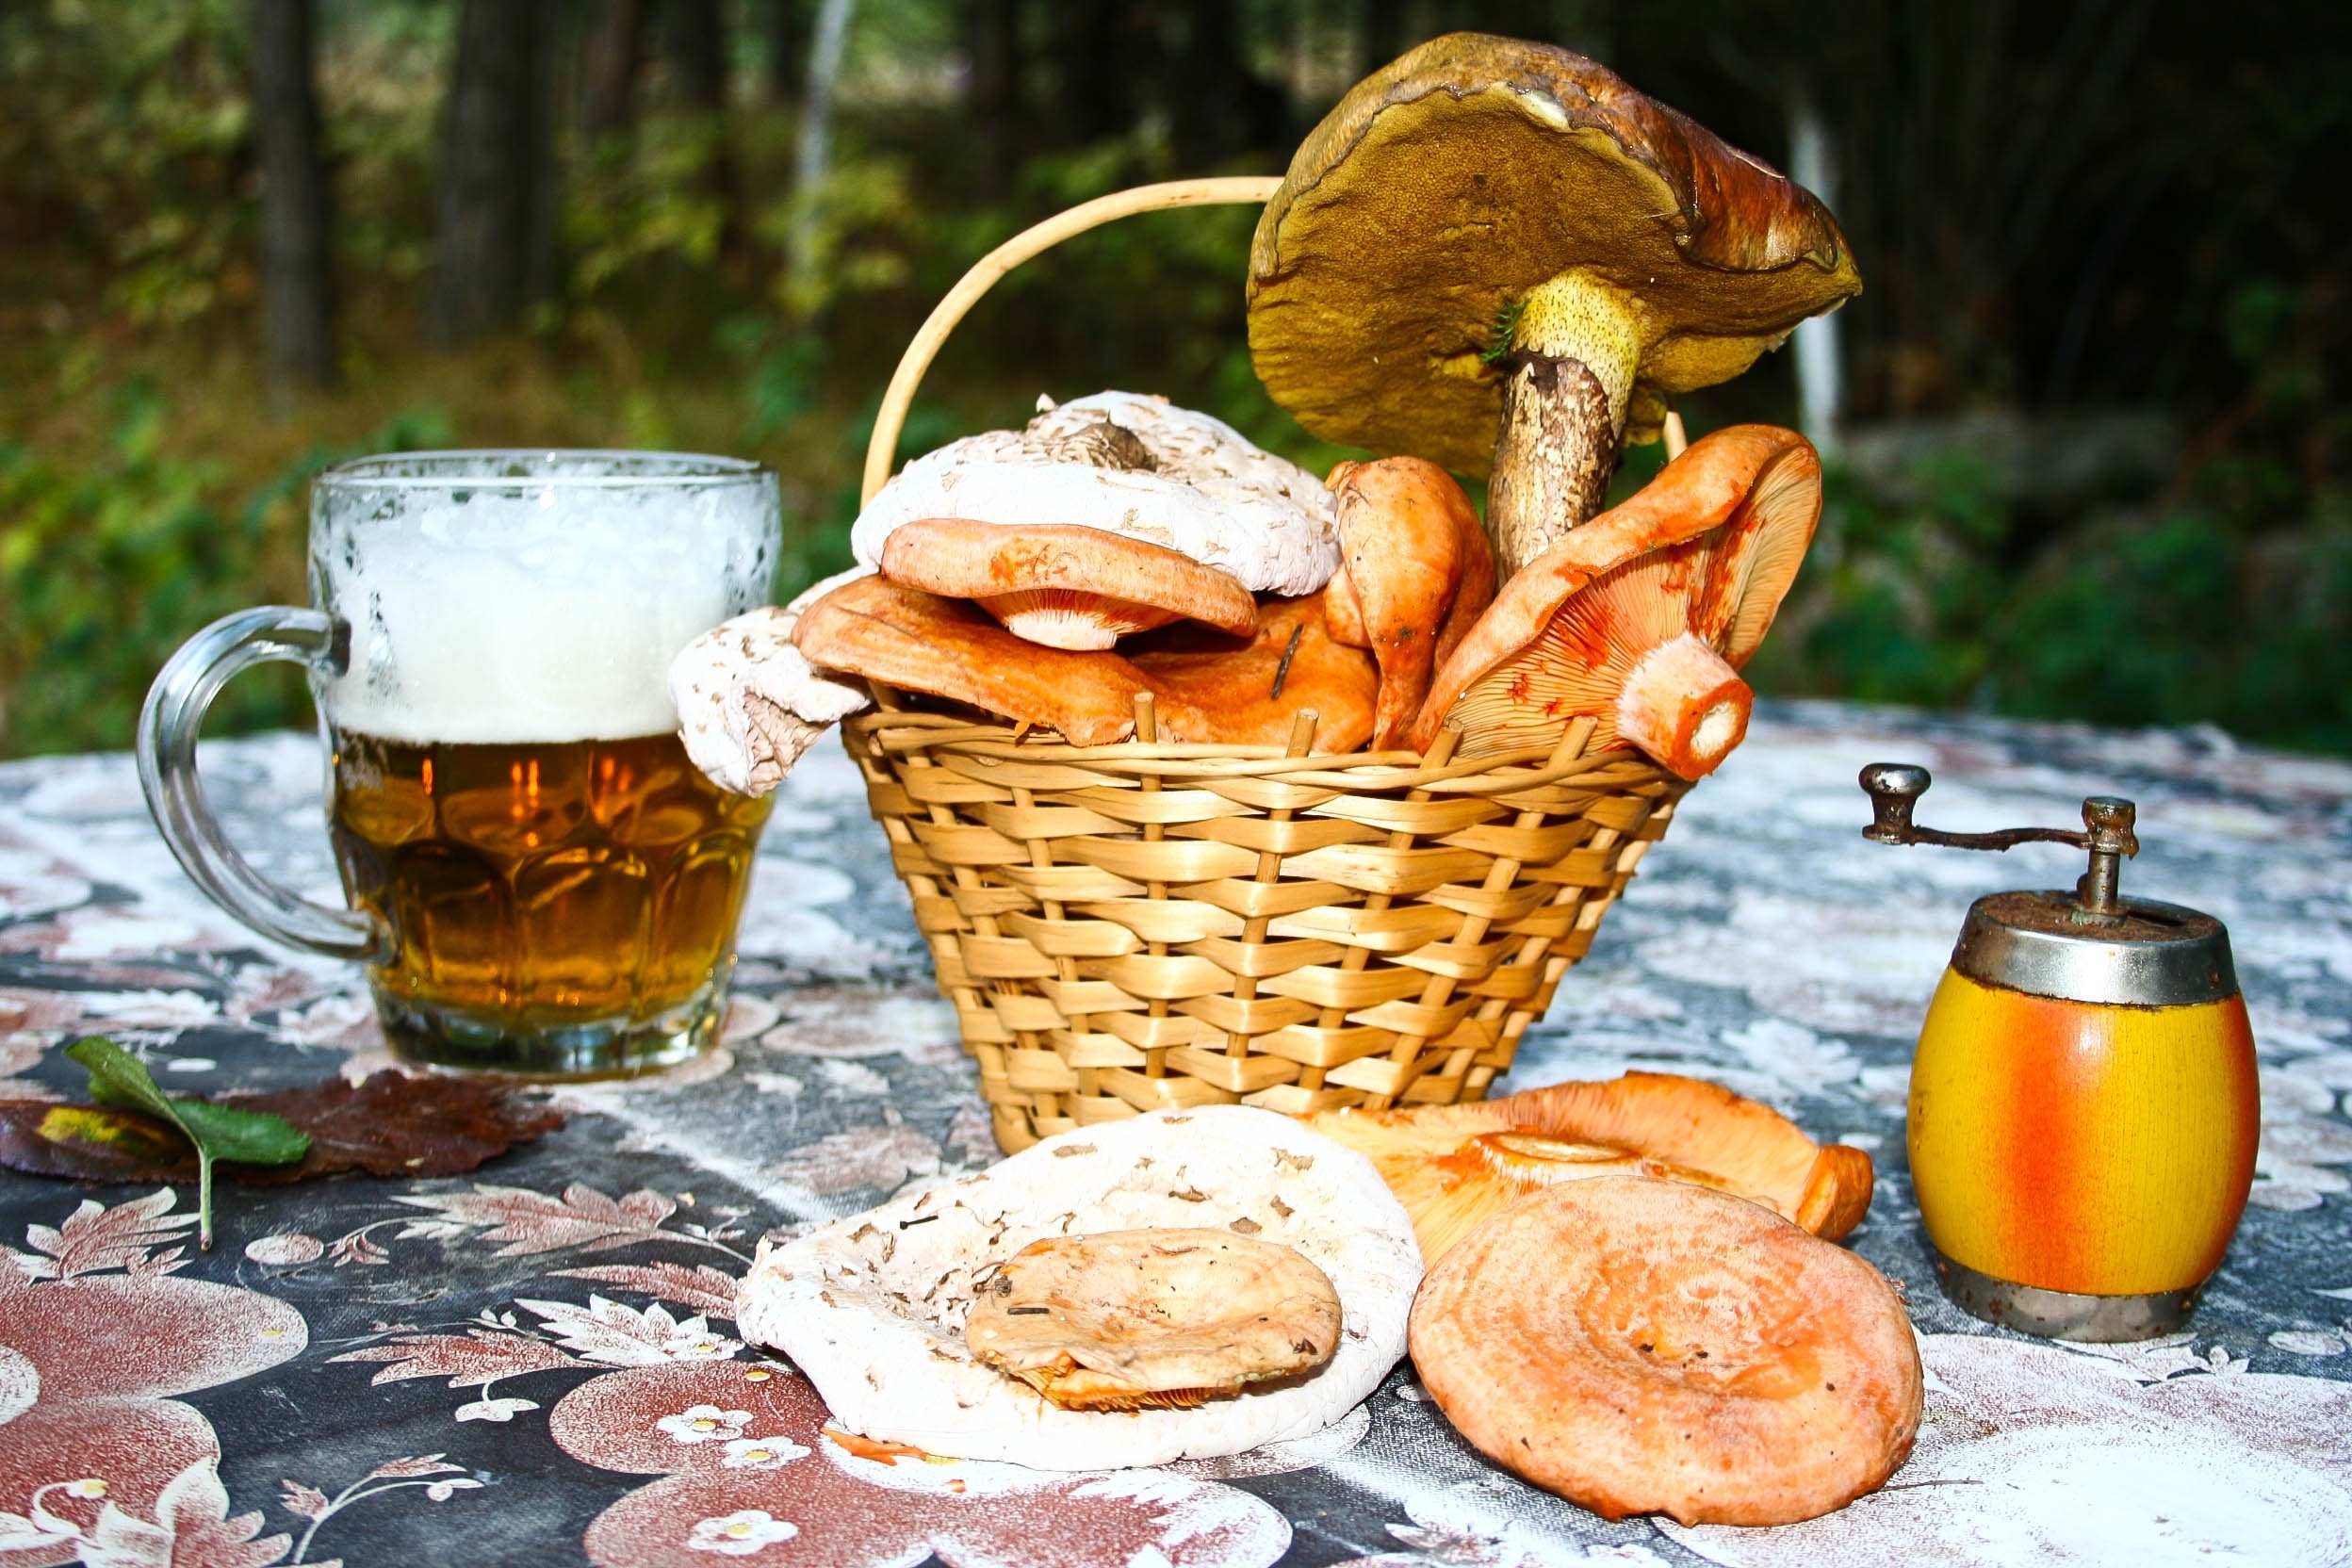 baked bread, brown wicker picnic basket and clear glass beer mug